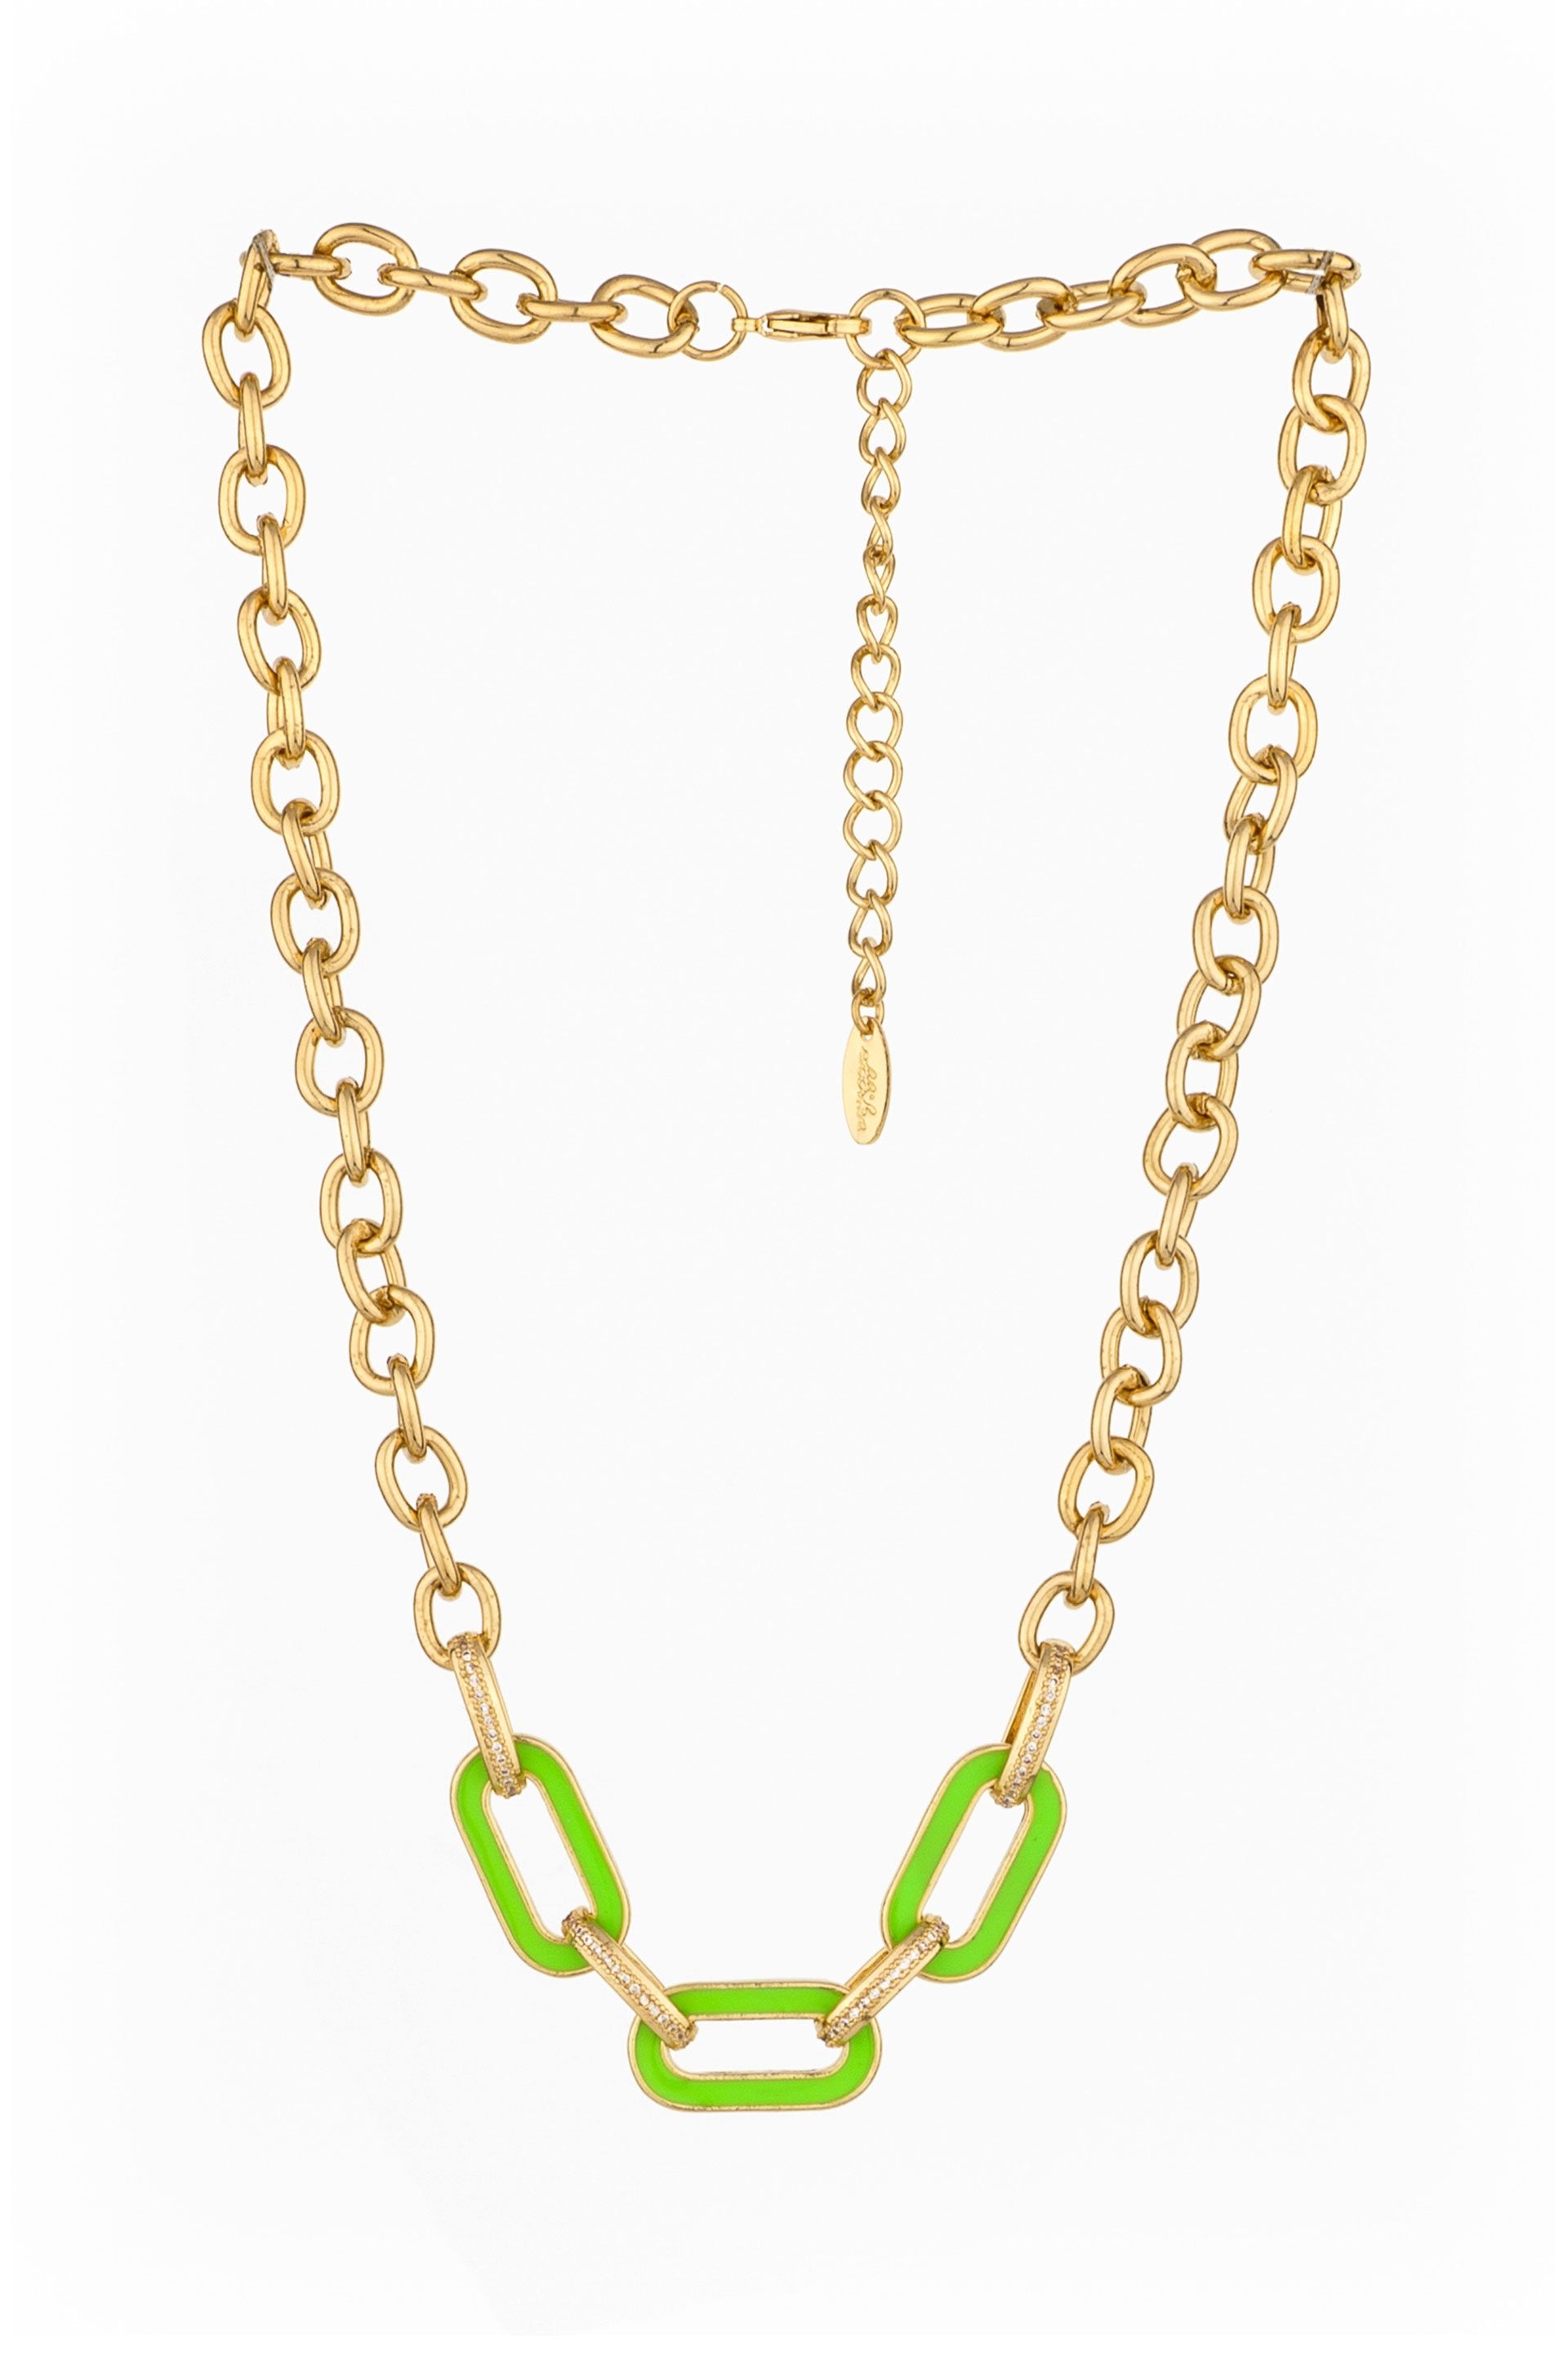 Neon Green Linked 18k Gold Plated Chain Necklace on white